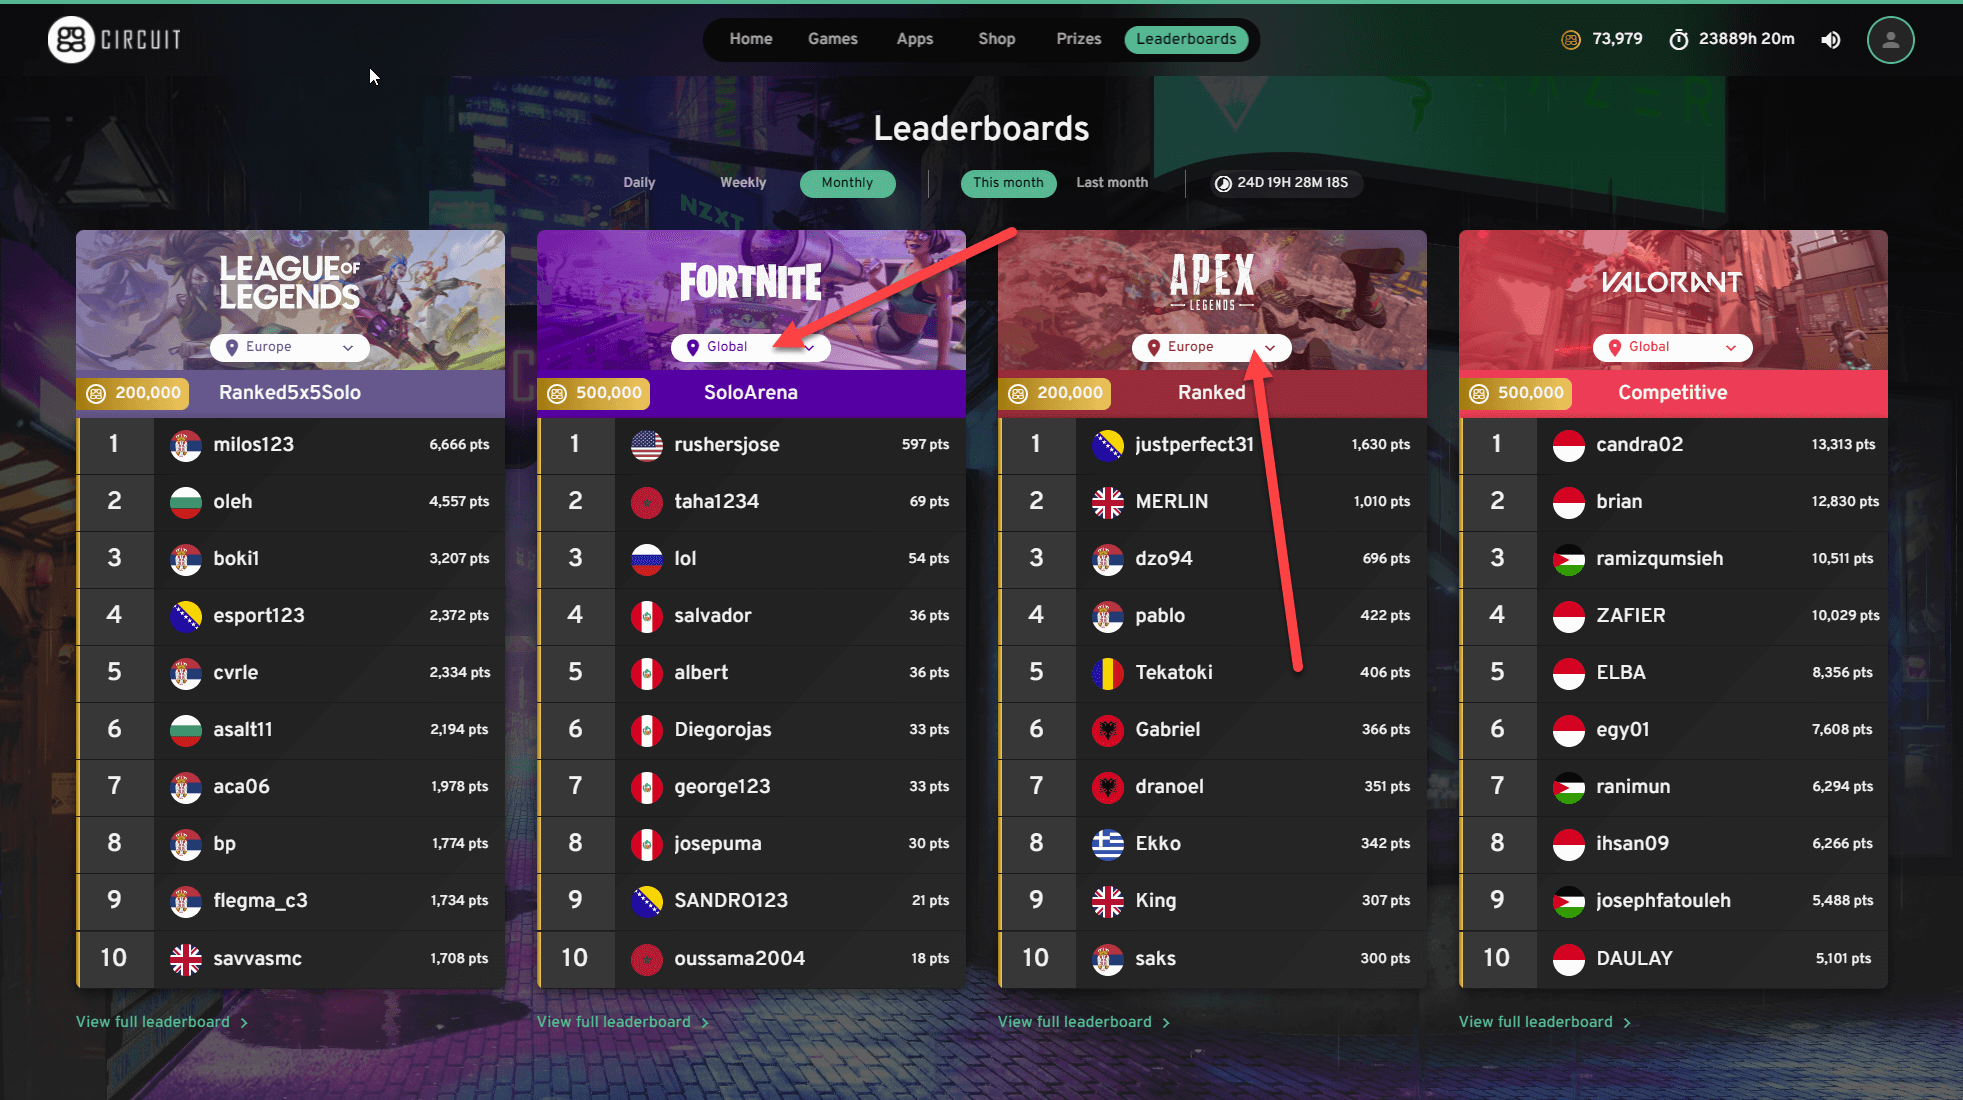 You can also choose to enable regional or global leaderboards